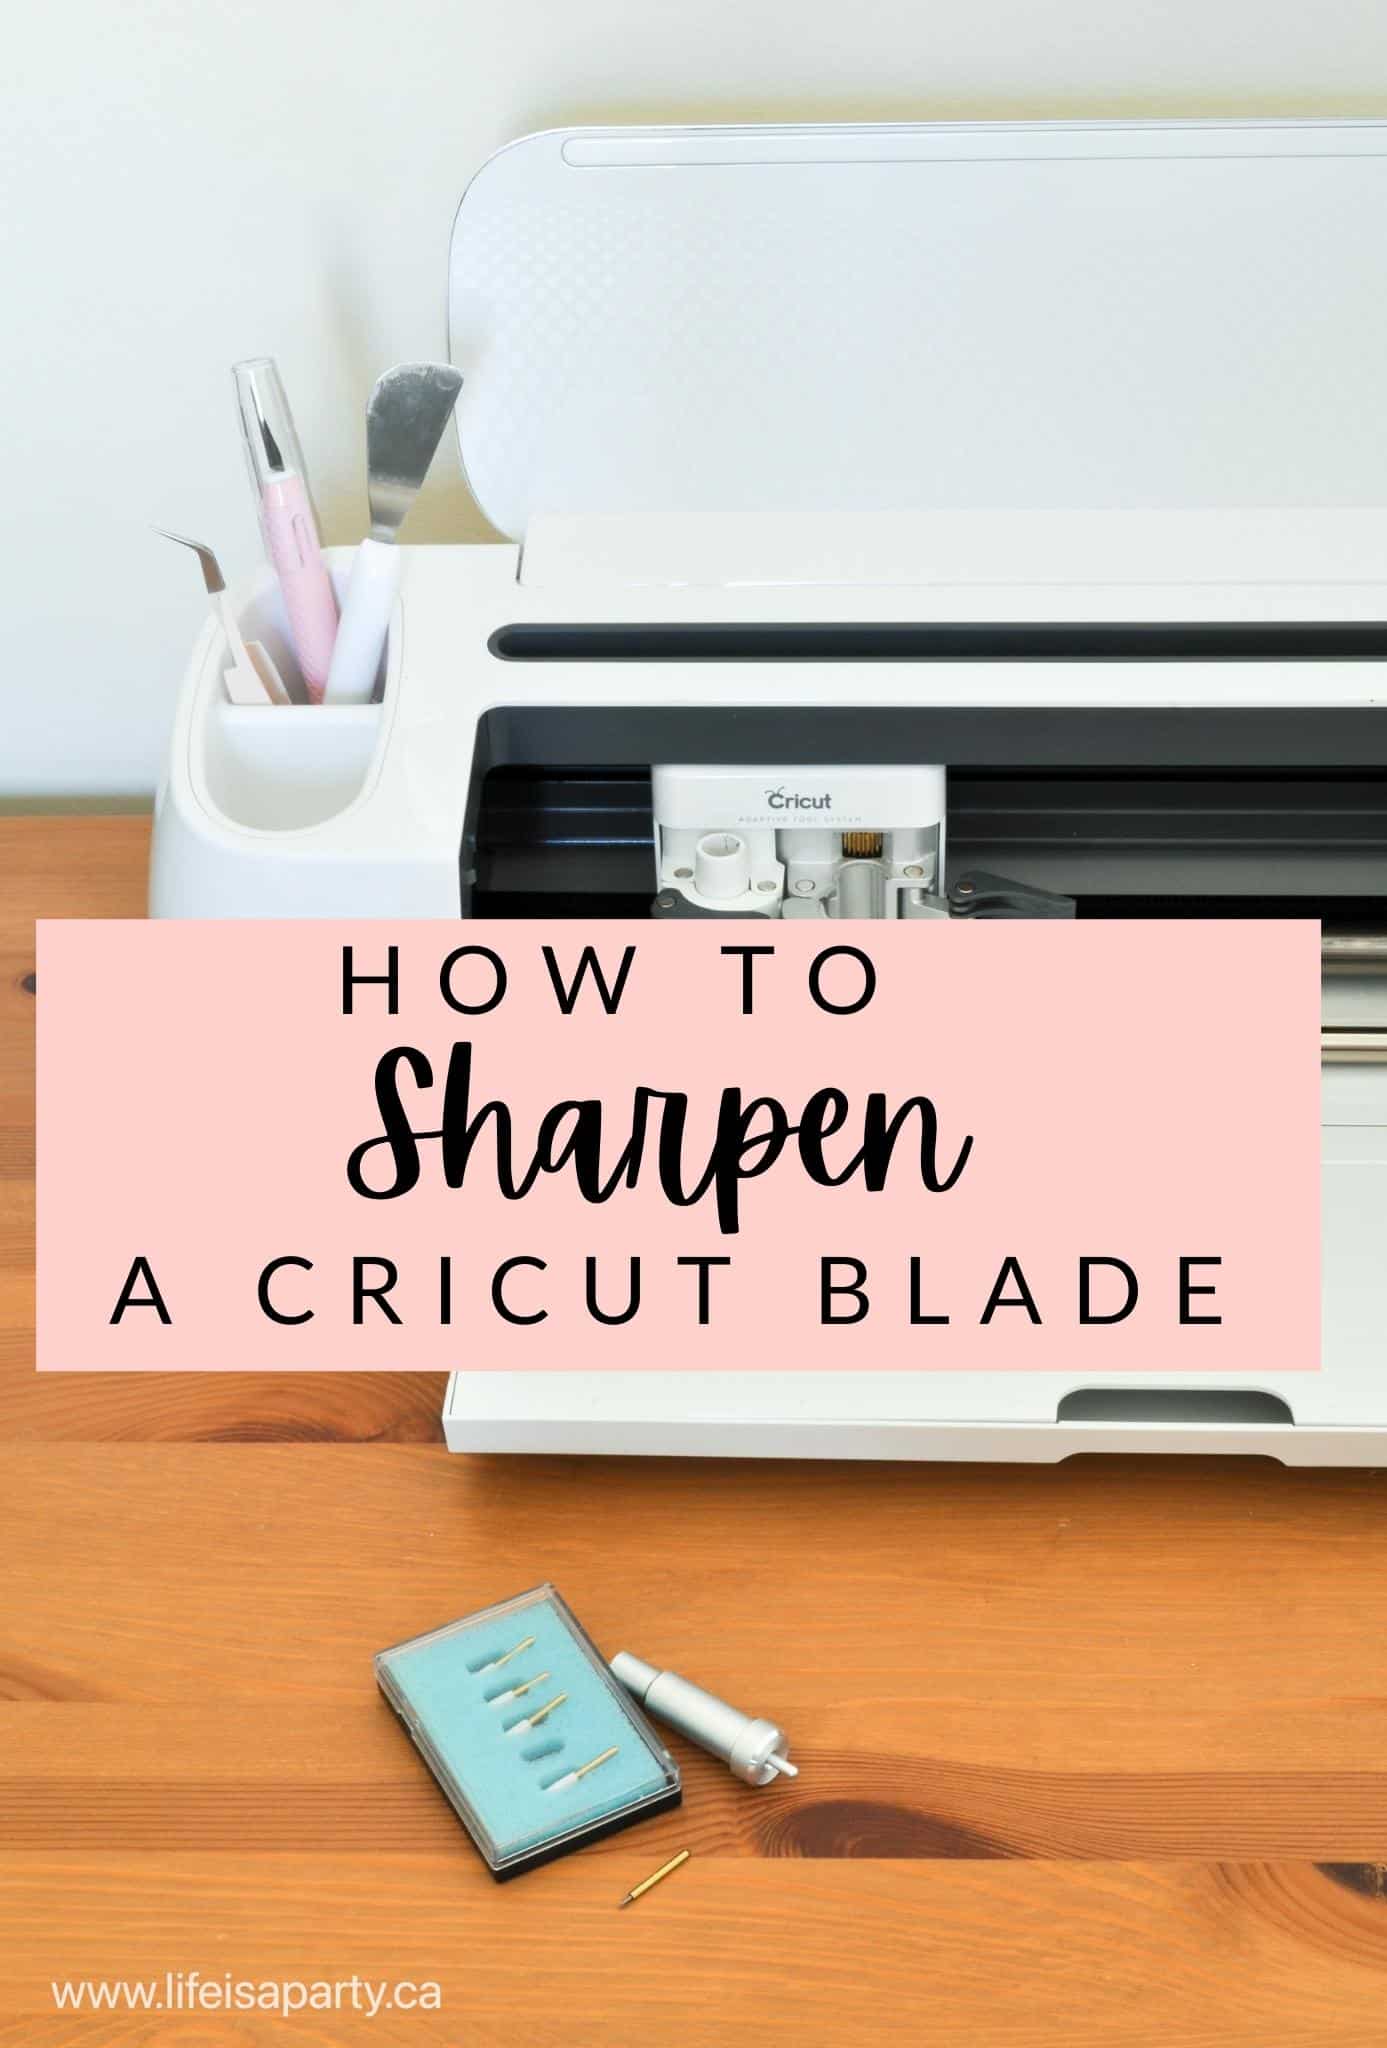  How To Sharpen A Cricut Blade: why using aluminum foil does NOT work, and what to do instead using household items.